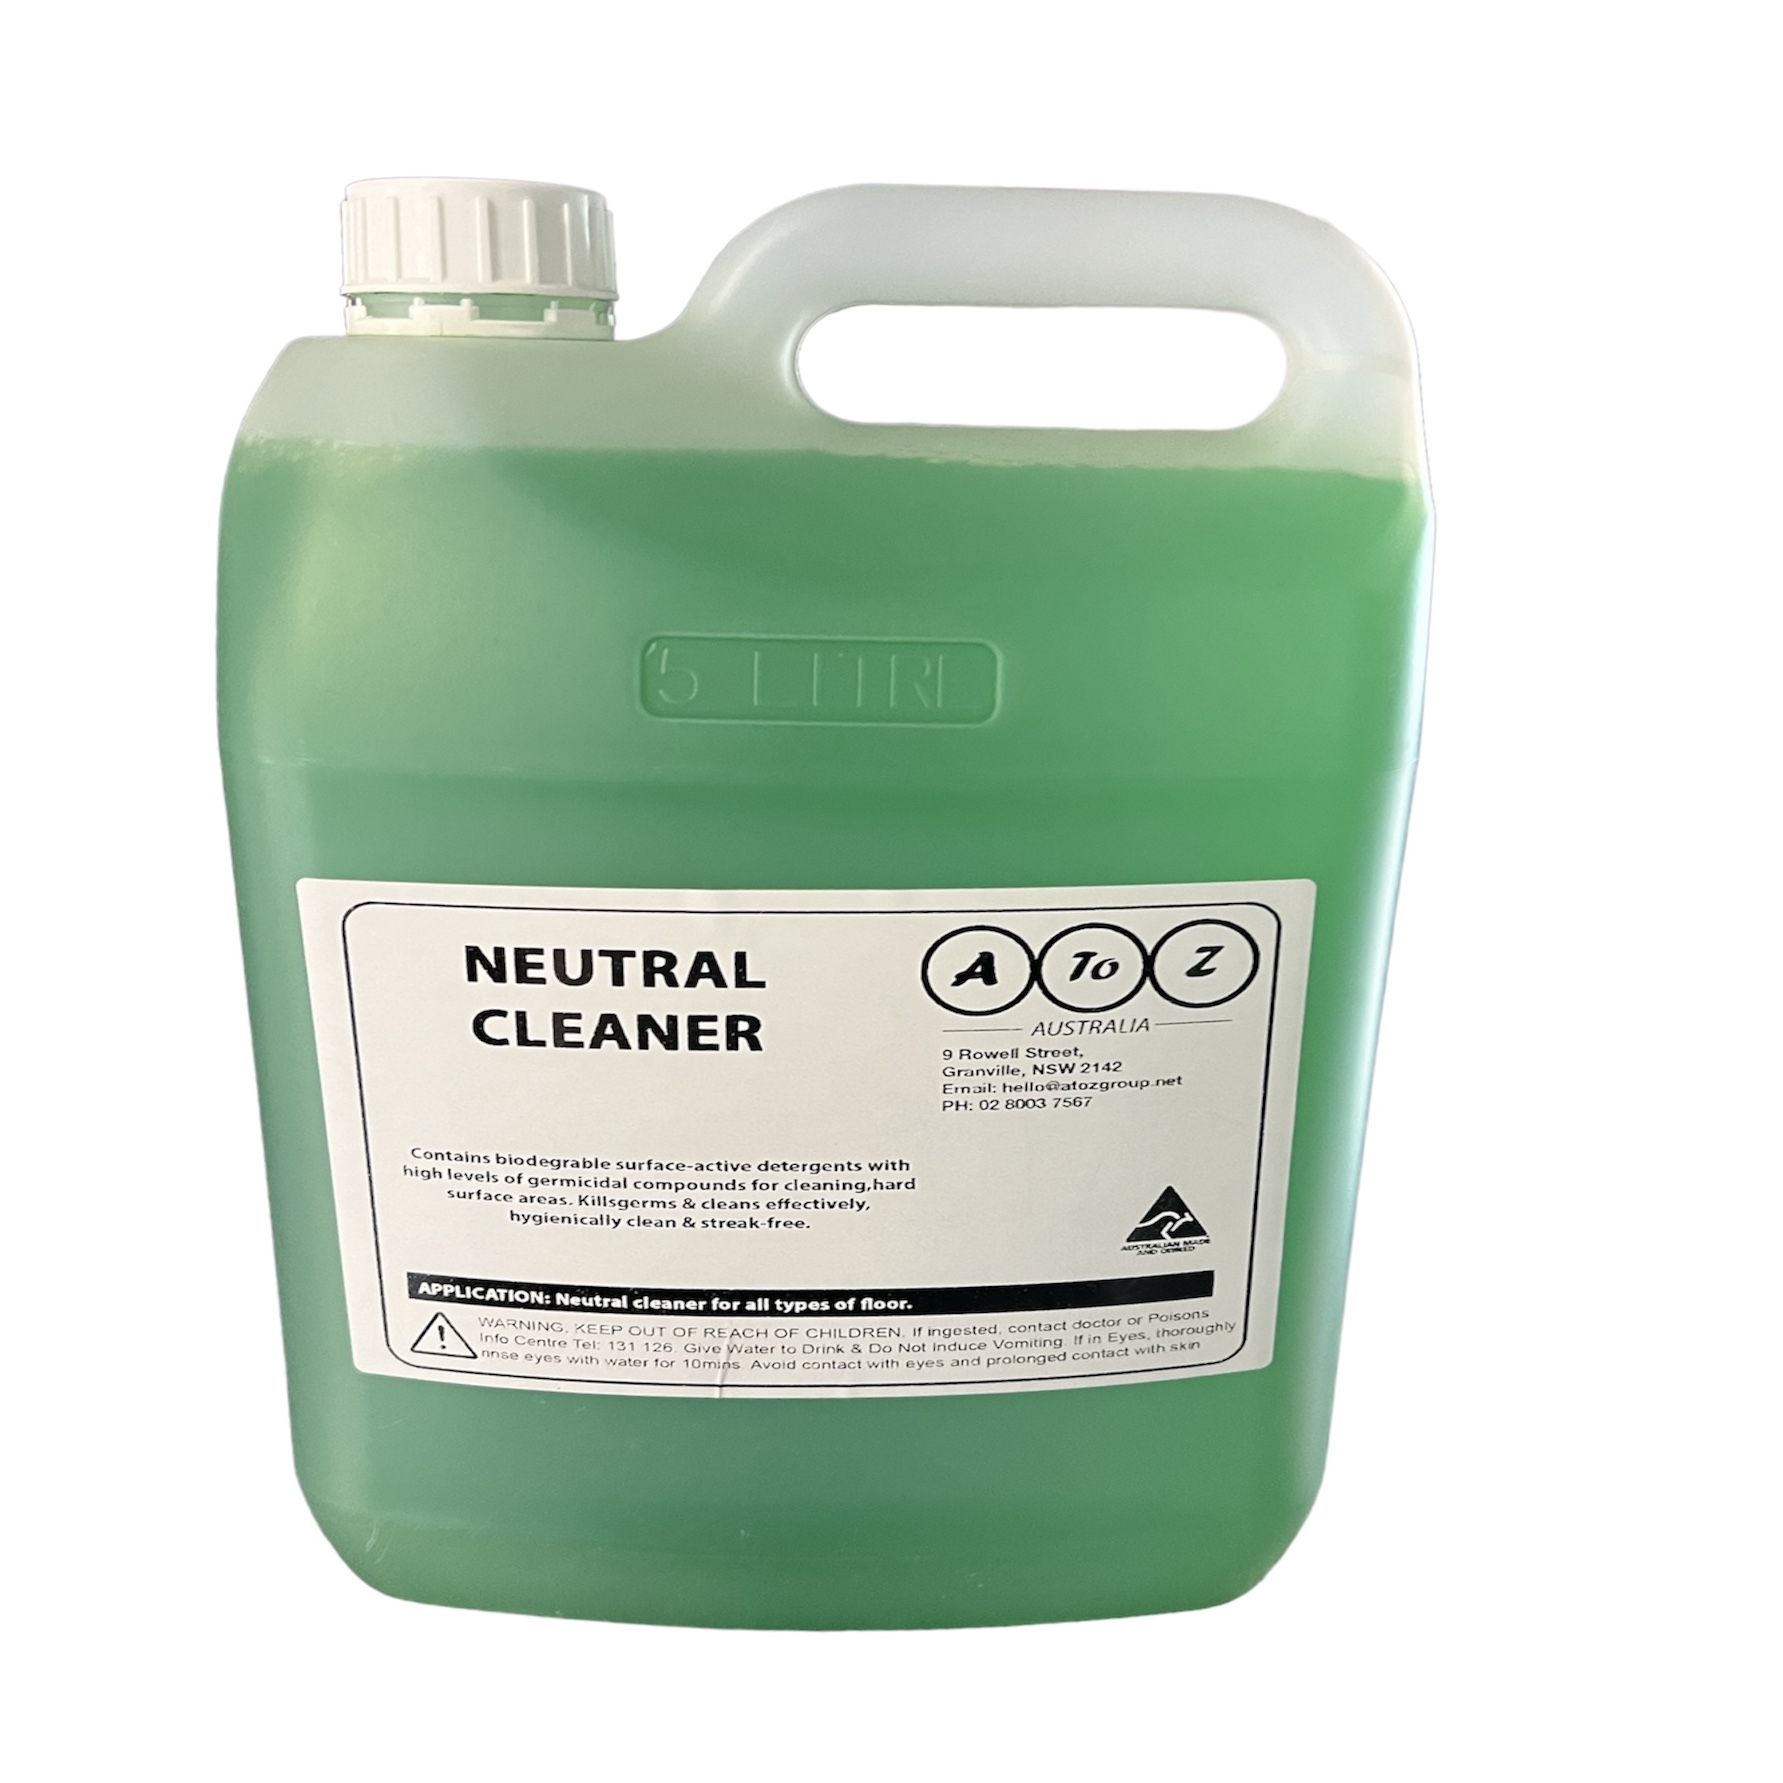 Neutral cleaner